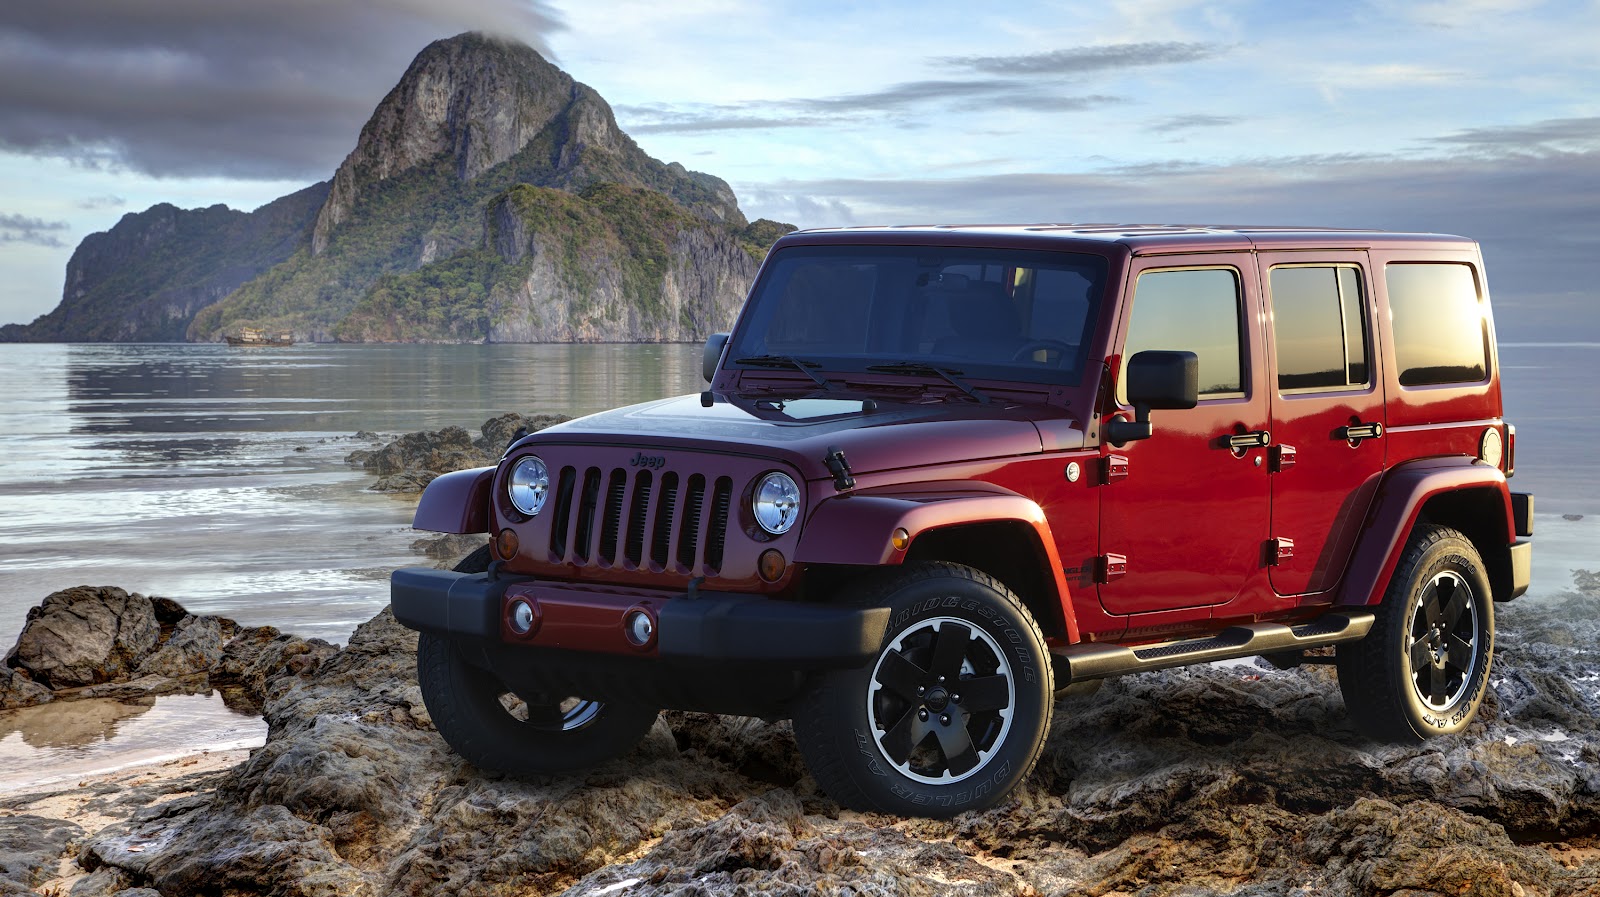 2018 jeep wrangler unlimited arctic wallpapers - 2016 Jeep Wrangler and Wrangler Unlimited X Edition